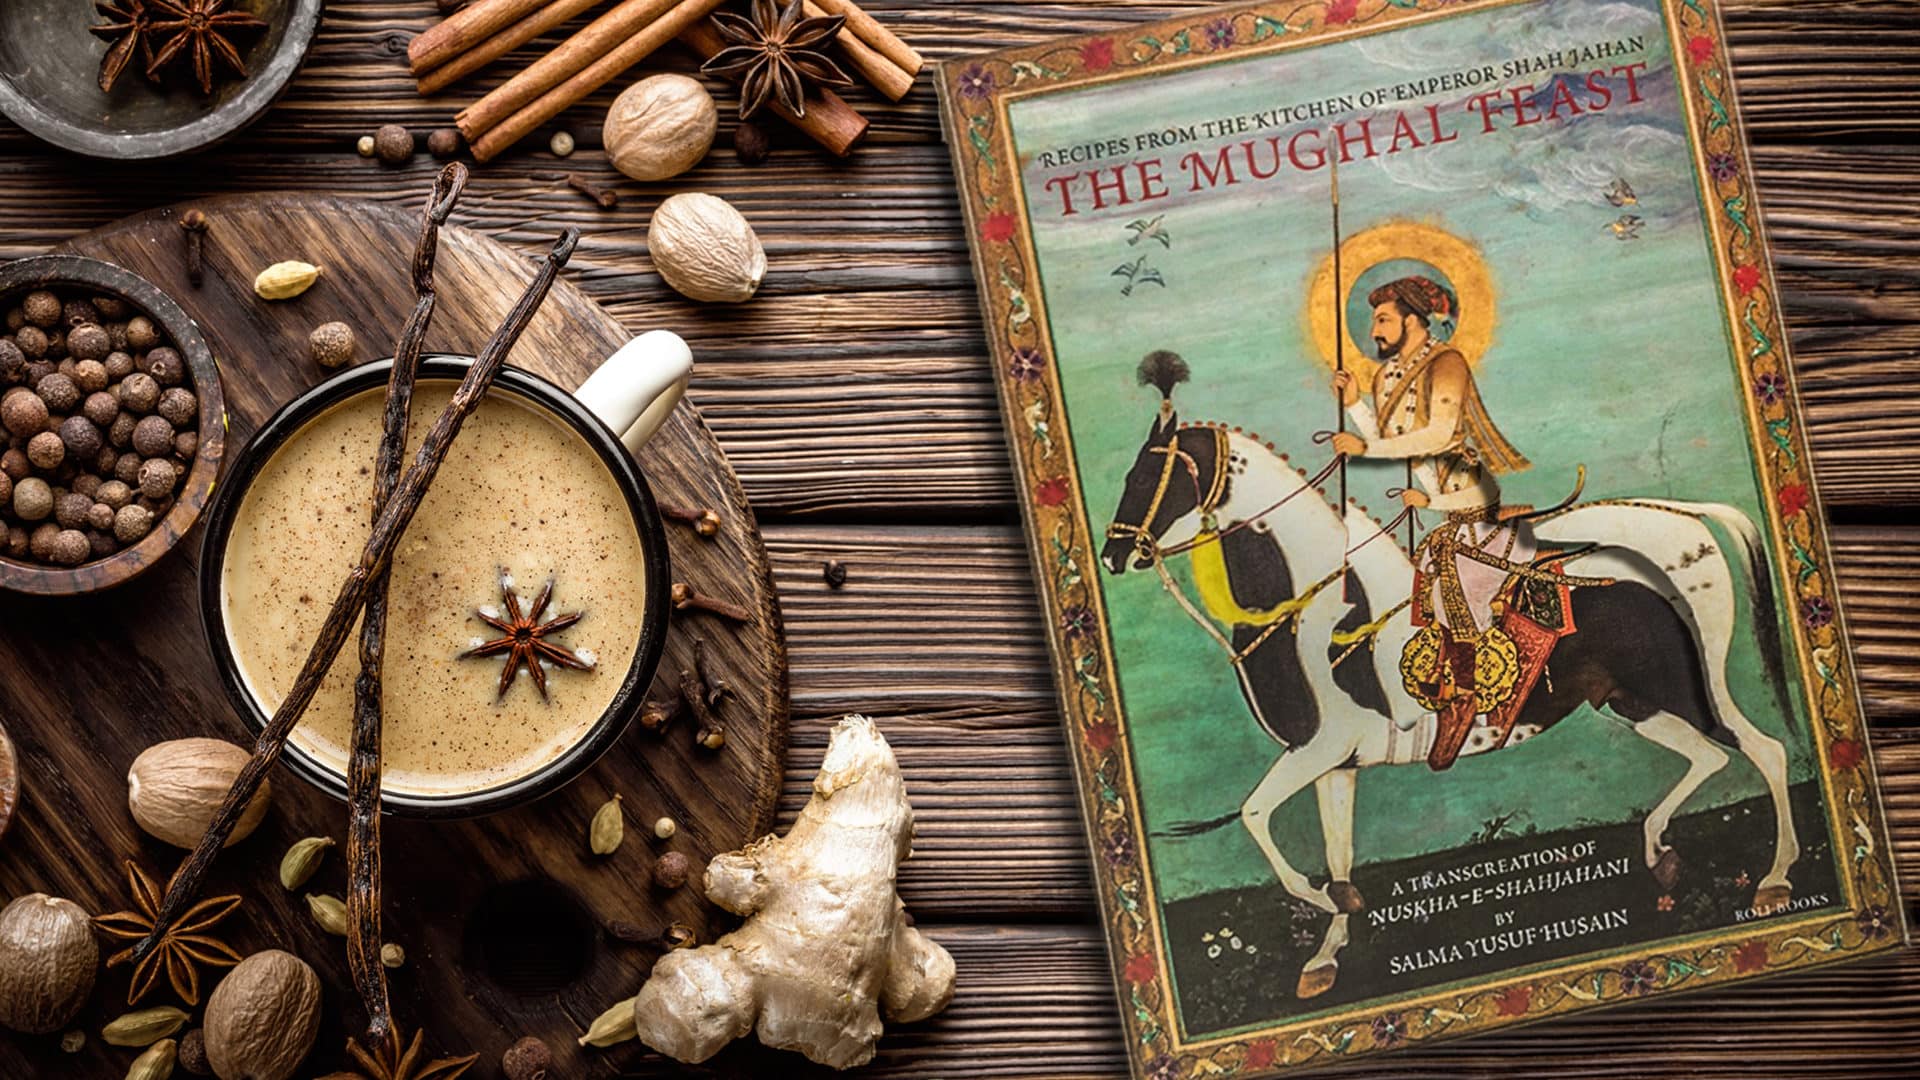 The Mughal Feast is a beautiful new book chronicling recipes